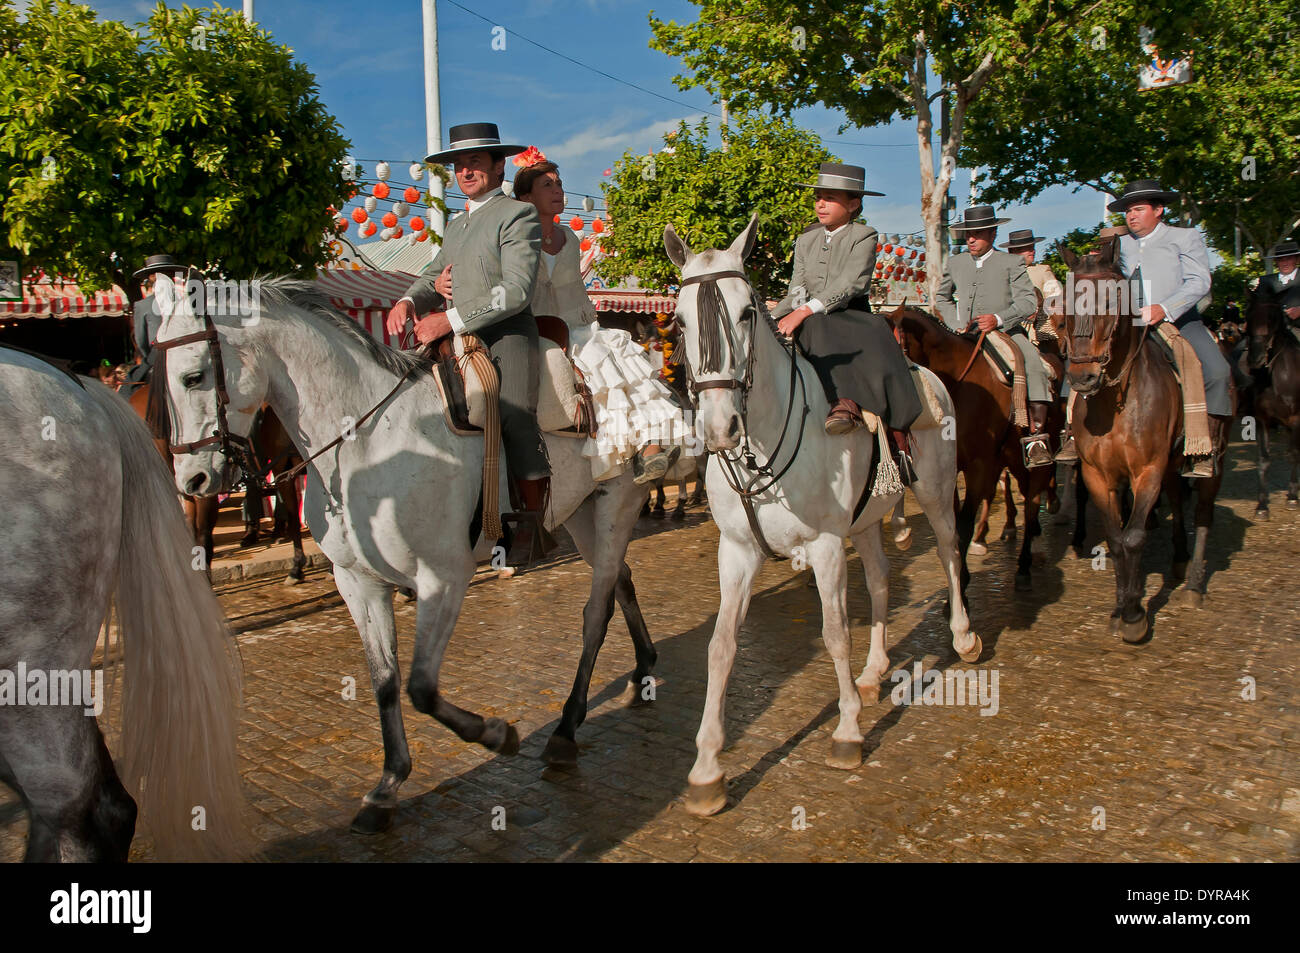 April Fair, Riders riding on horseback with traditional flamenco costumes, Seville. Region of Andalusia, Spain, Europe Stock Photo